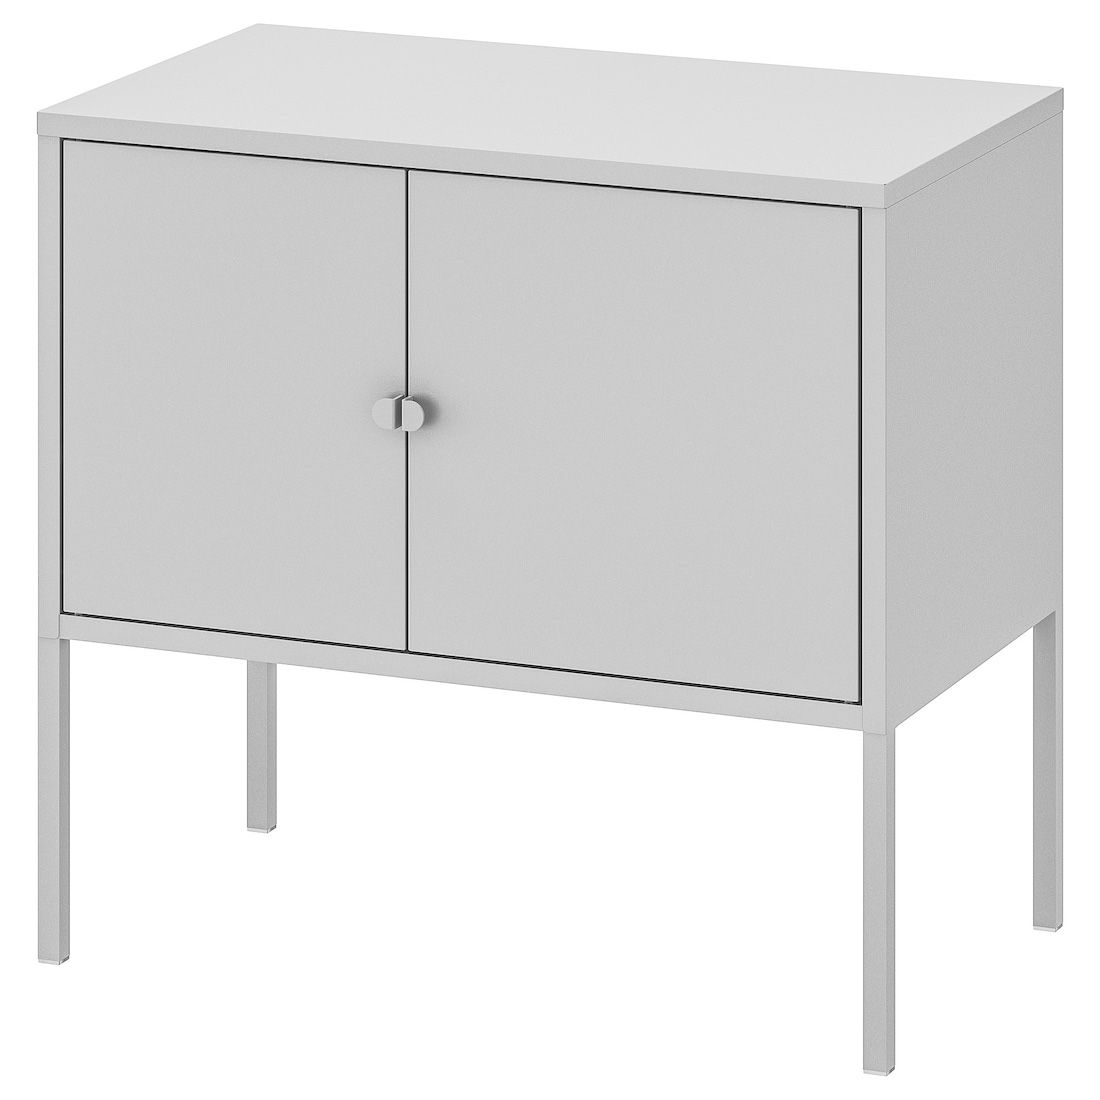 Small Gray Metal Cabinet